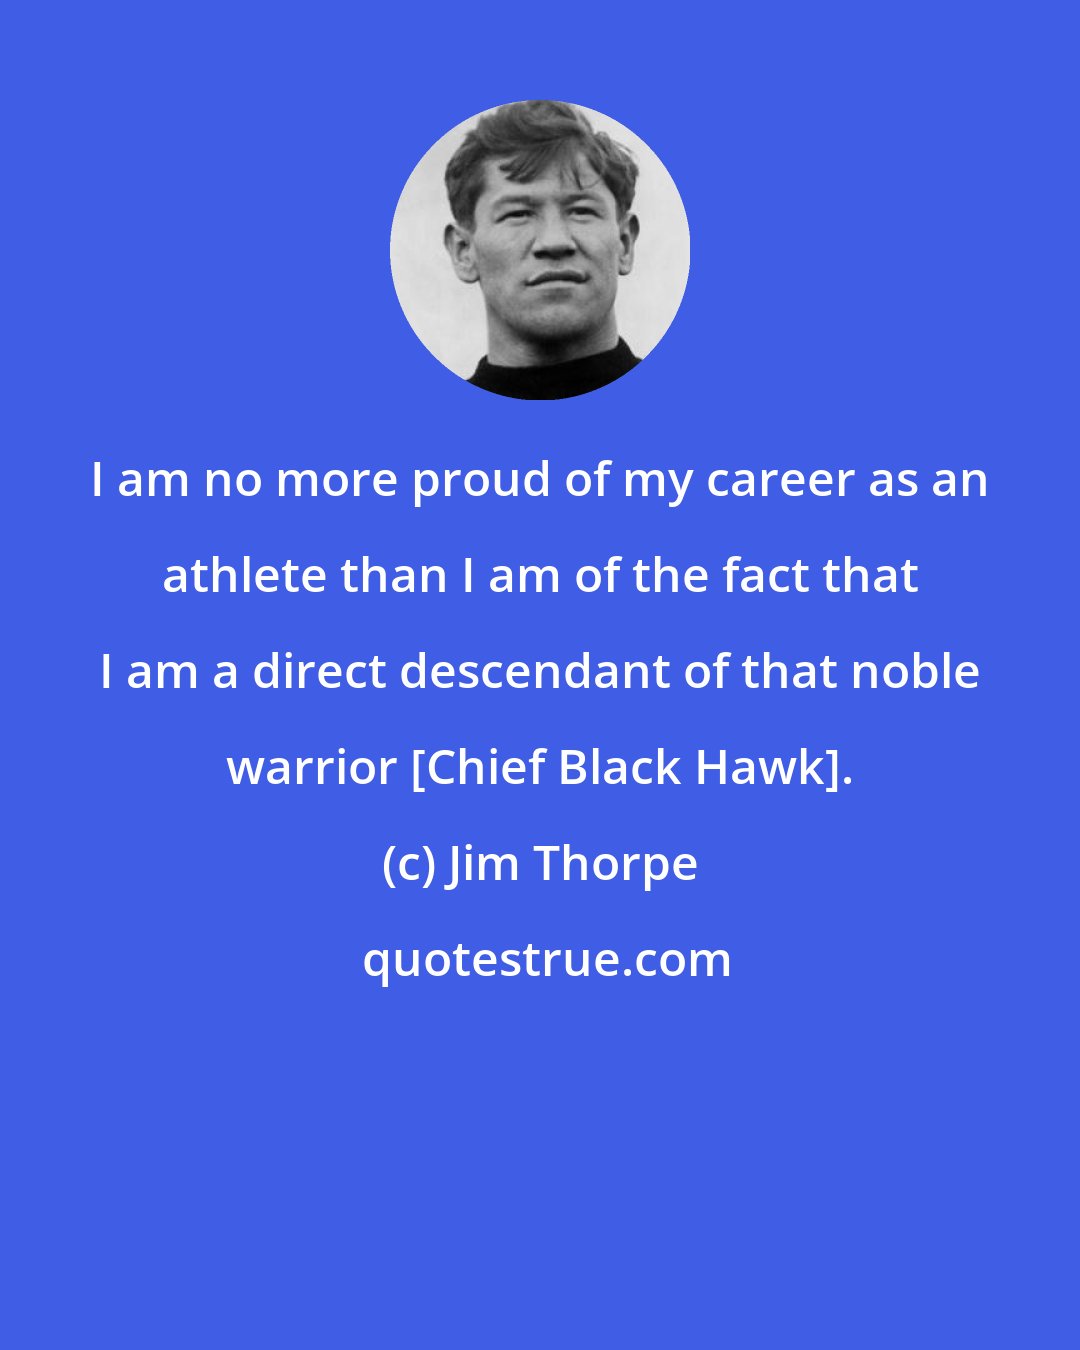 Jim Thorpe: I am no more proud of my career as an athlete than I am of the fact that I am a direct descendant of that noble warrior [Chief Black Hawk].